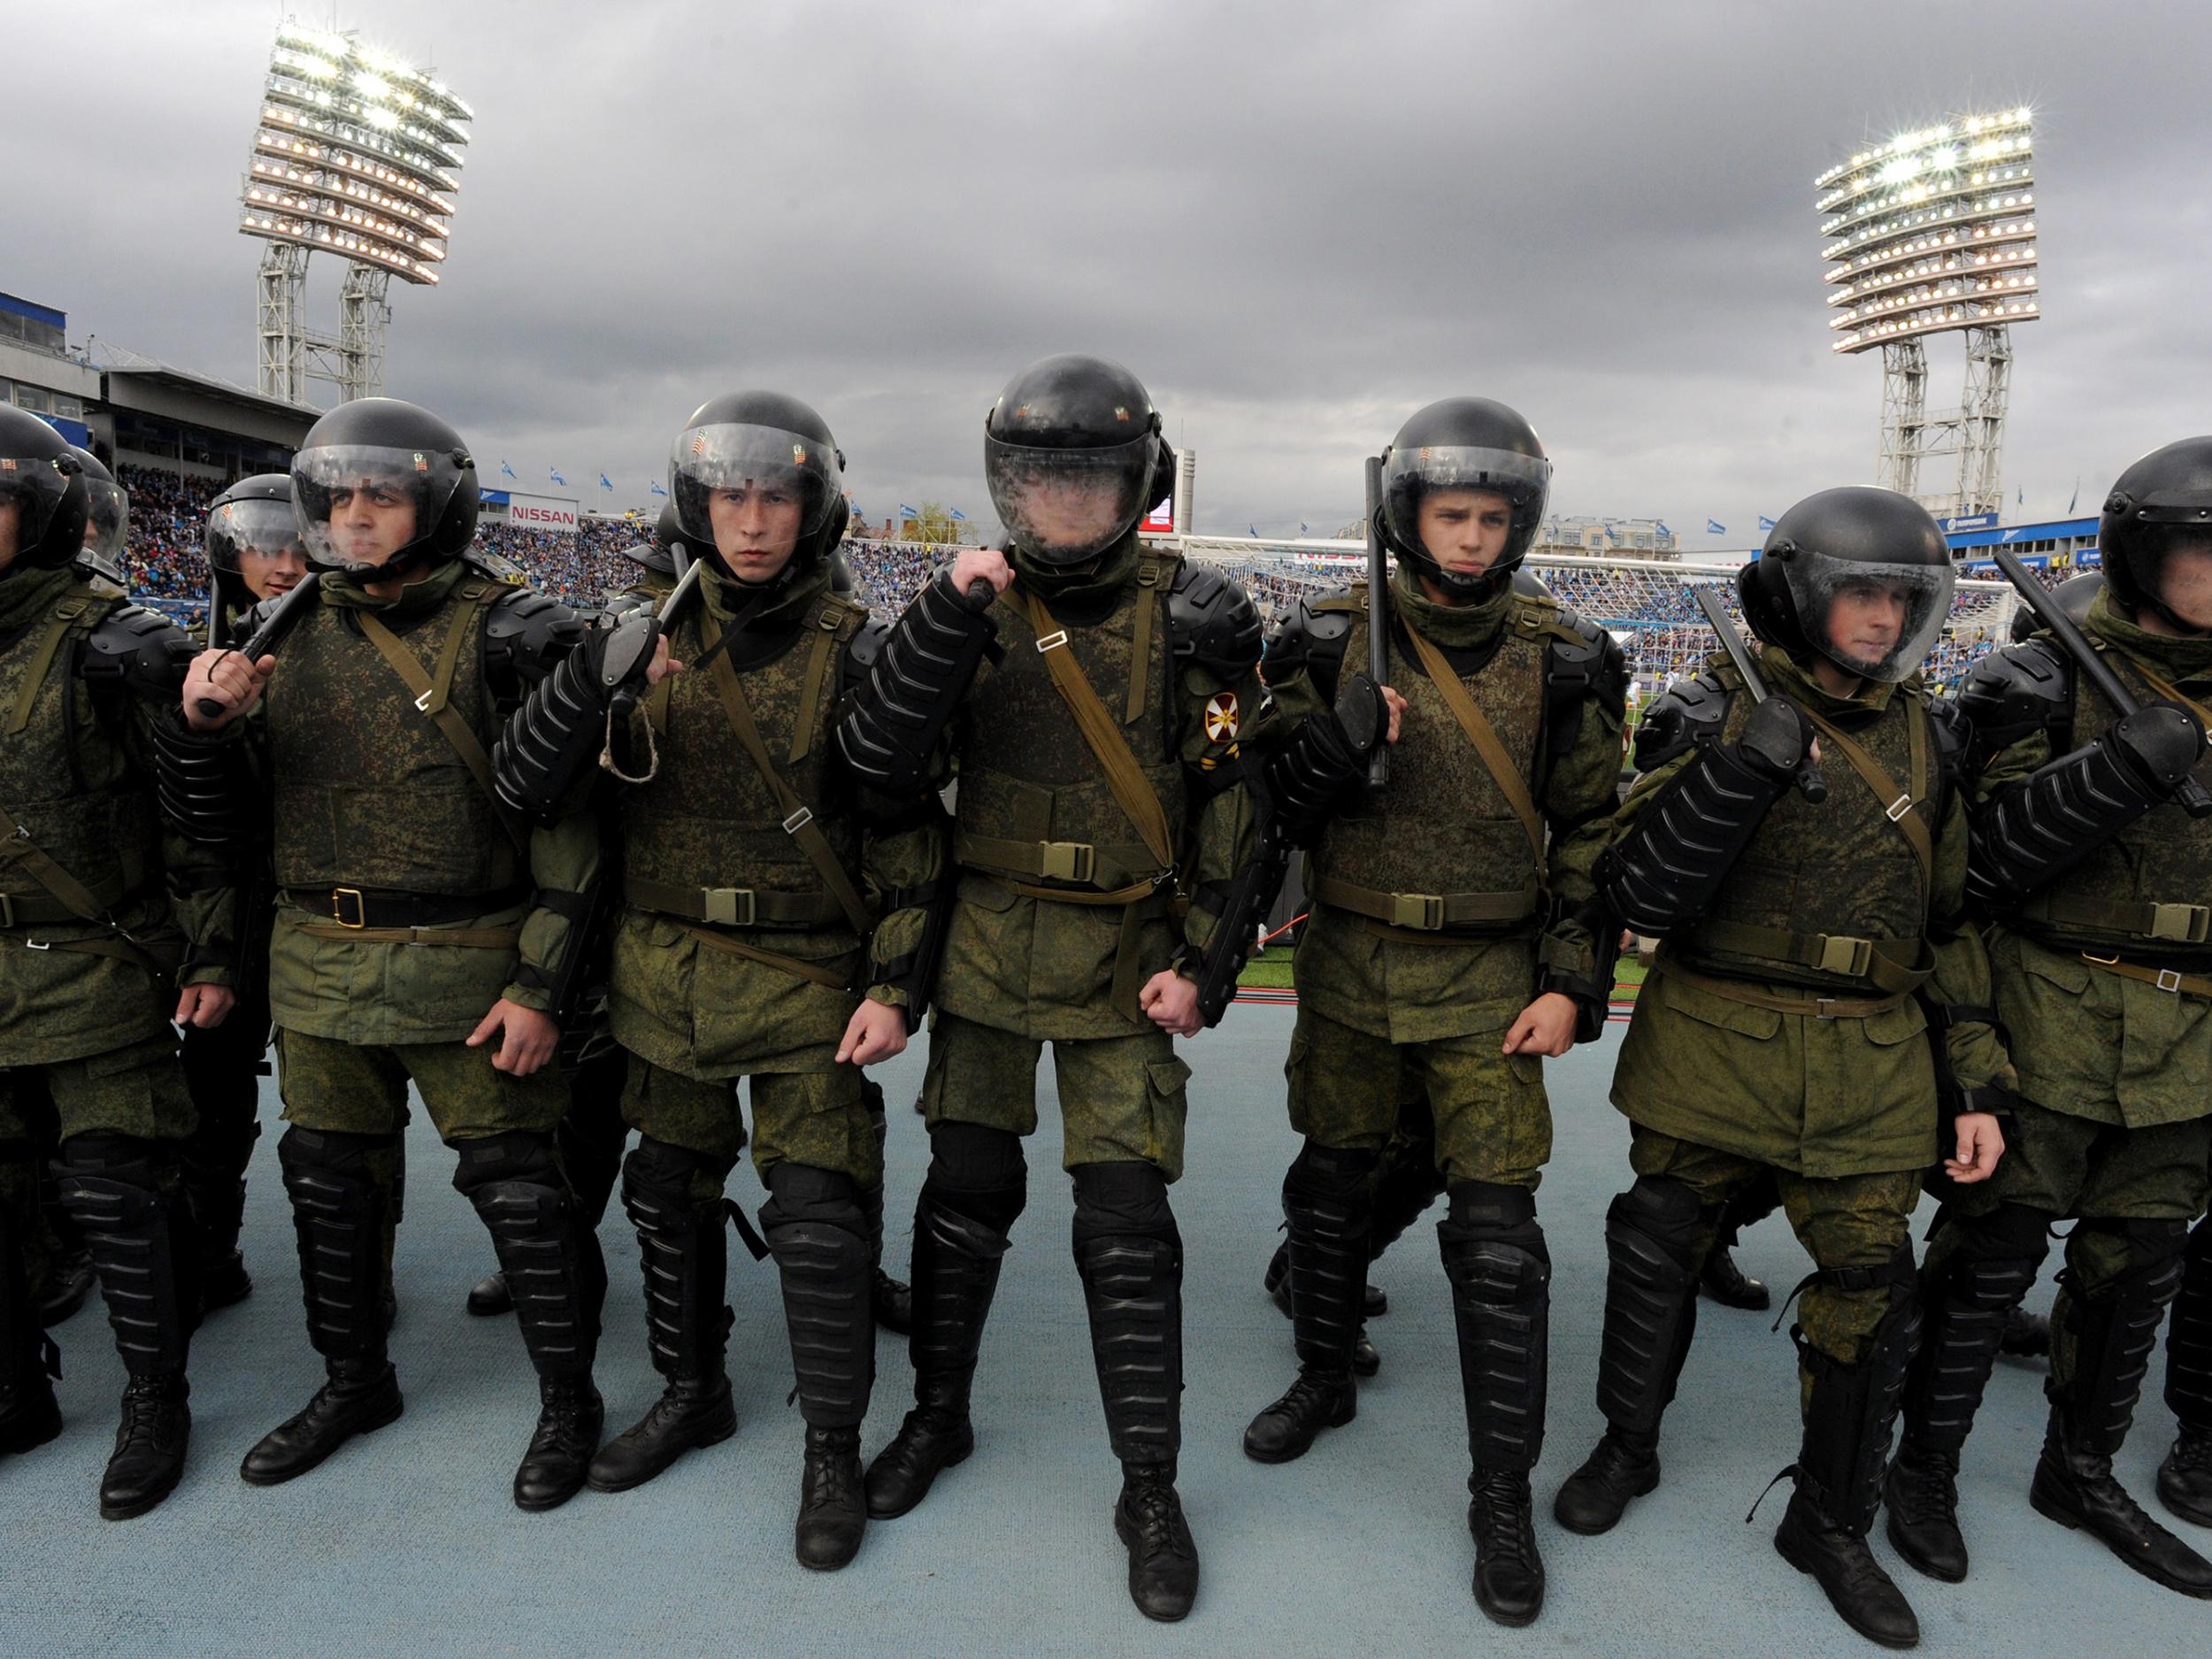 There is a renewed commitment in Russia to stamp out hooliganism